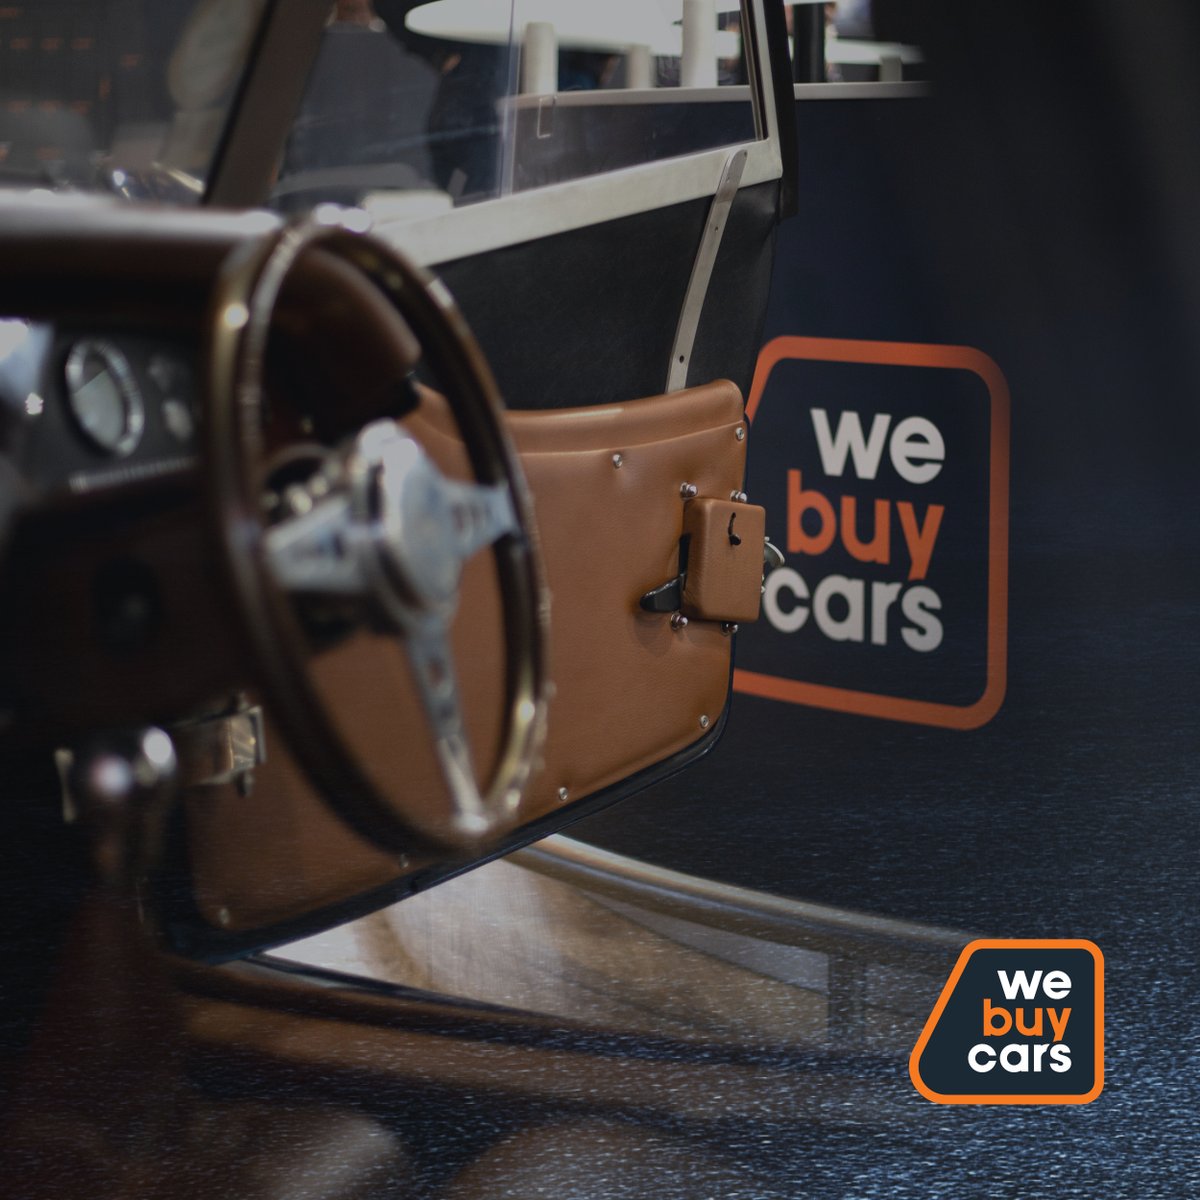 Don't buy that ride without taking it for a spin. At #WeBuyCars you can test drive a vehicle to make sure it's the best fit for you 🚗🙌 #carsforsale #preownedcars #usedcars #usedcarsforsale #carshopping #carfinance #autosales #carsales #carlifestyle #vintagecar